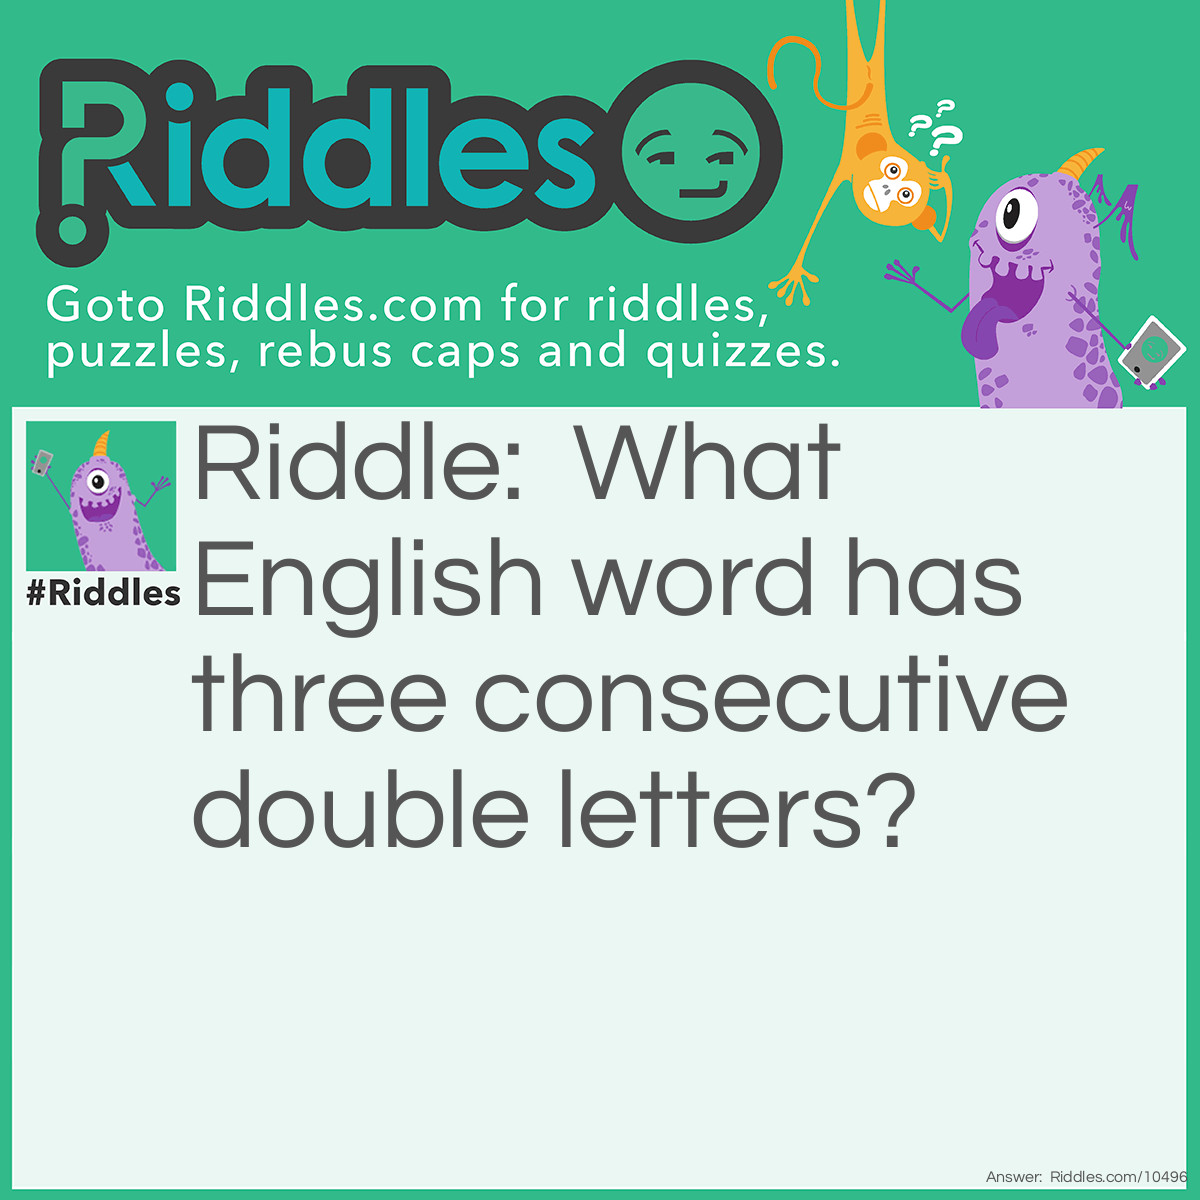 Riddle: What English word has three consecutive double letters? Answer: Bookkeeper.